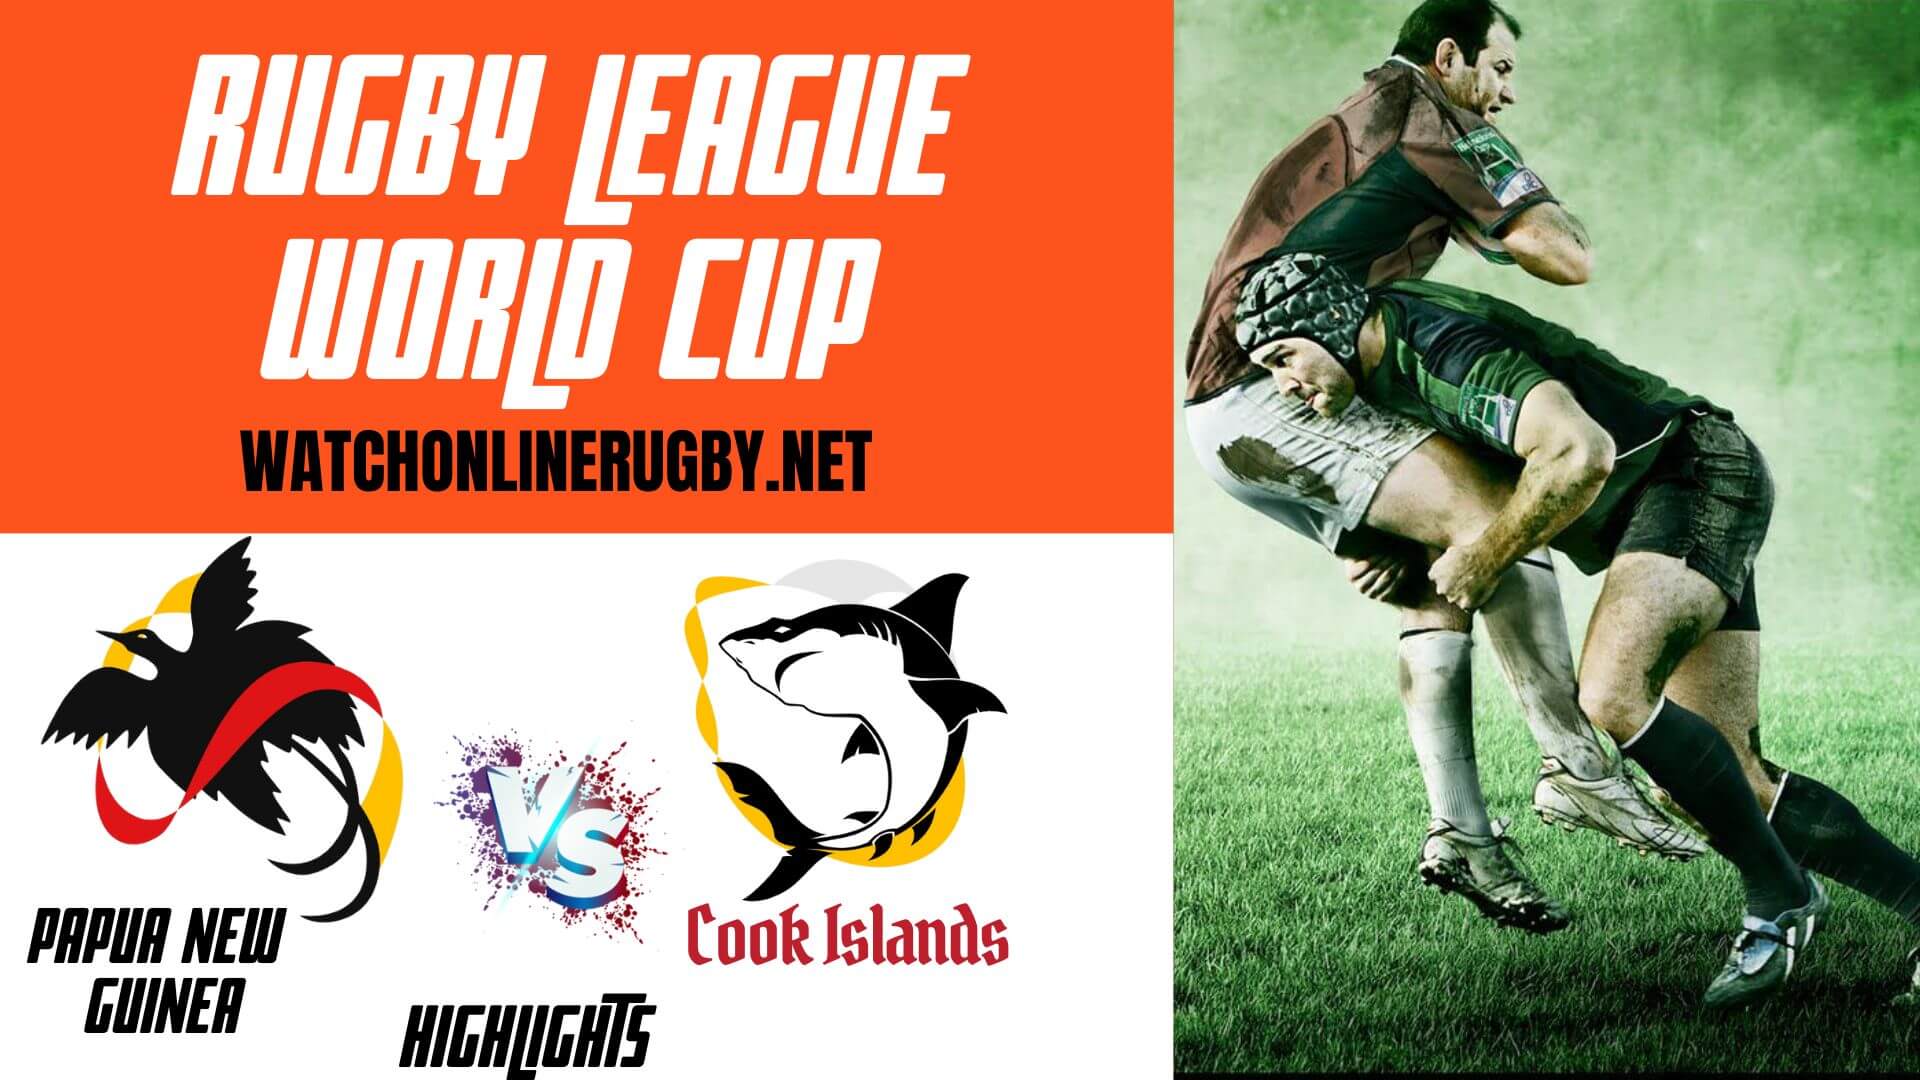 Papua New Guinea Vs Cook Islands Rugby League World Cup 2022 RD 2